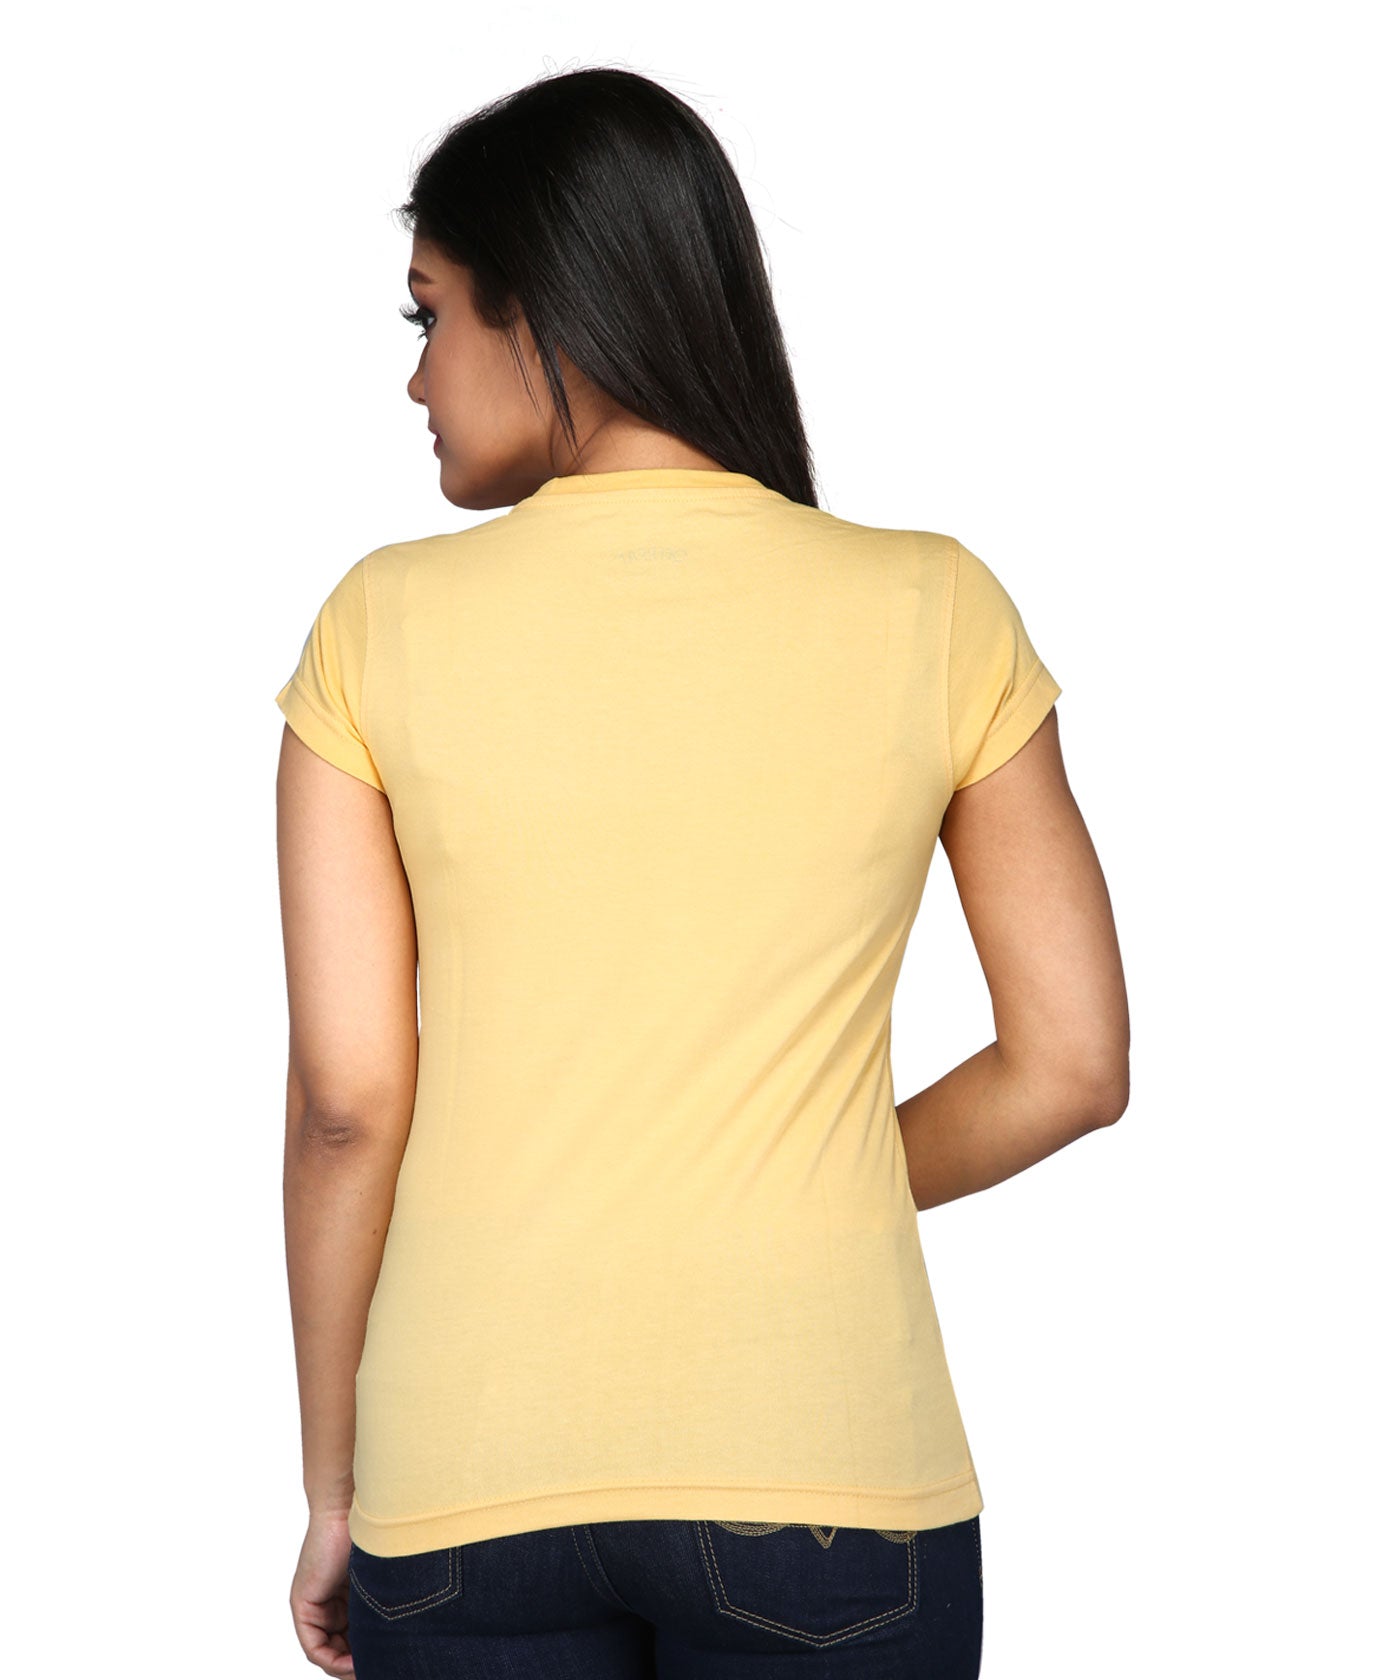 Beeing With You - Premium Round Neck Cotton Tees for Women - Golden Yellow